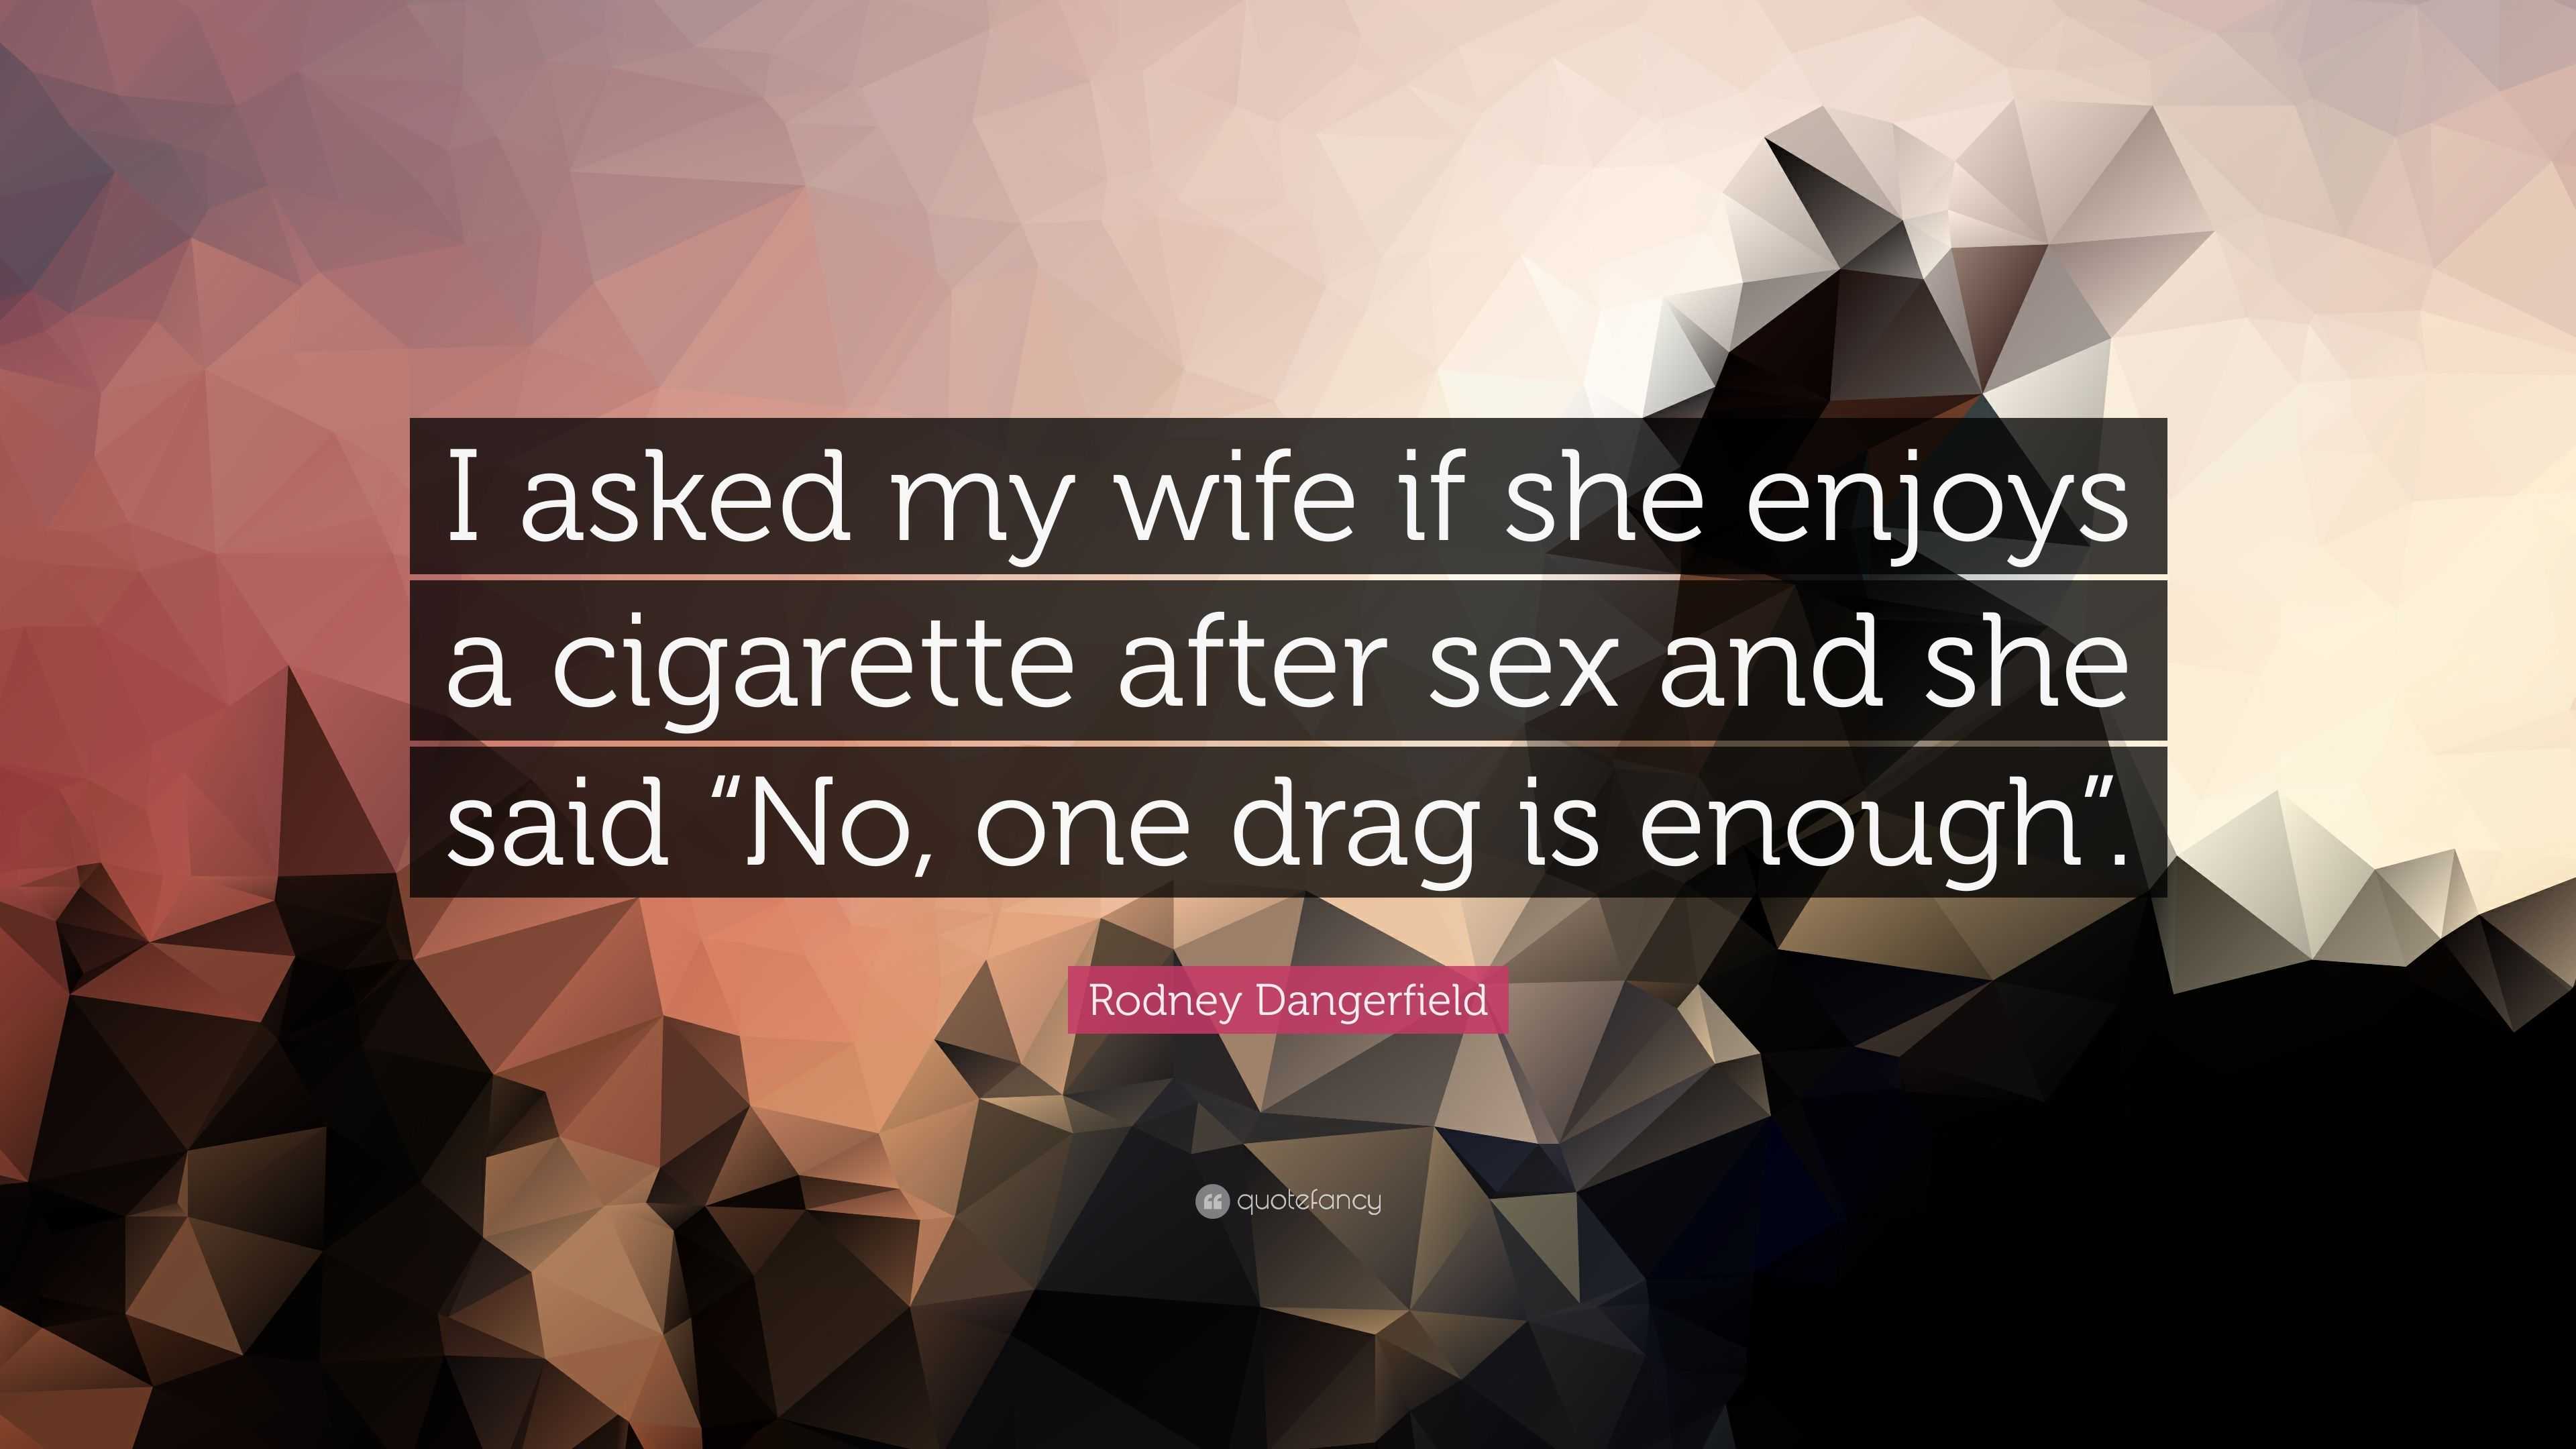 Rodney Dangerfield Quote “I asked my wife if she enjoys a cigarette after sex and pic